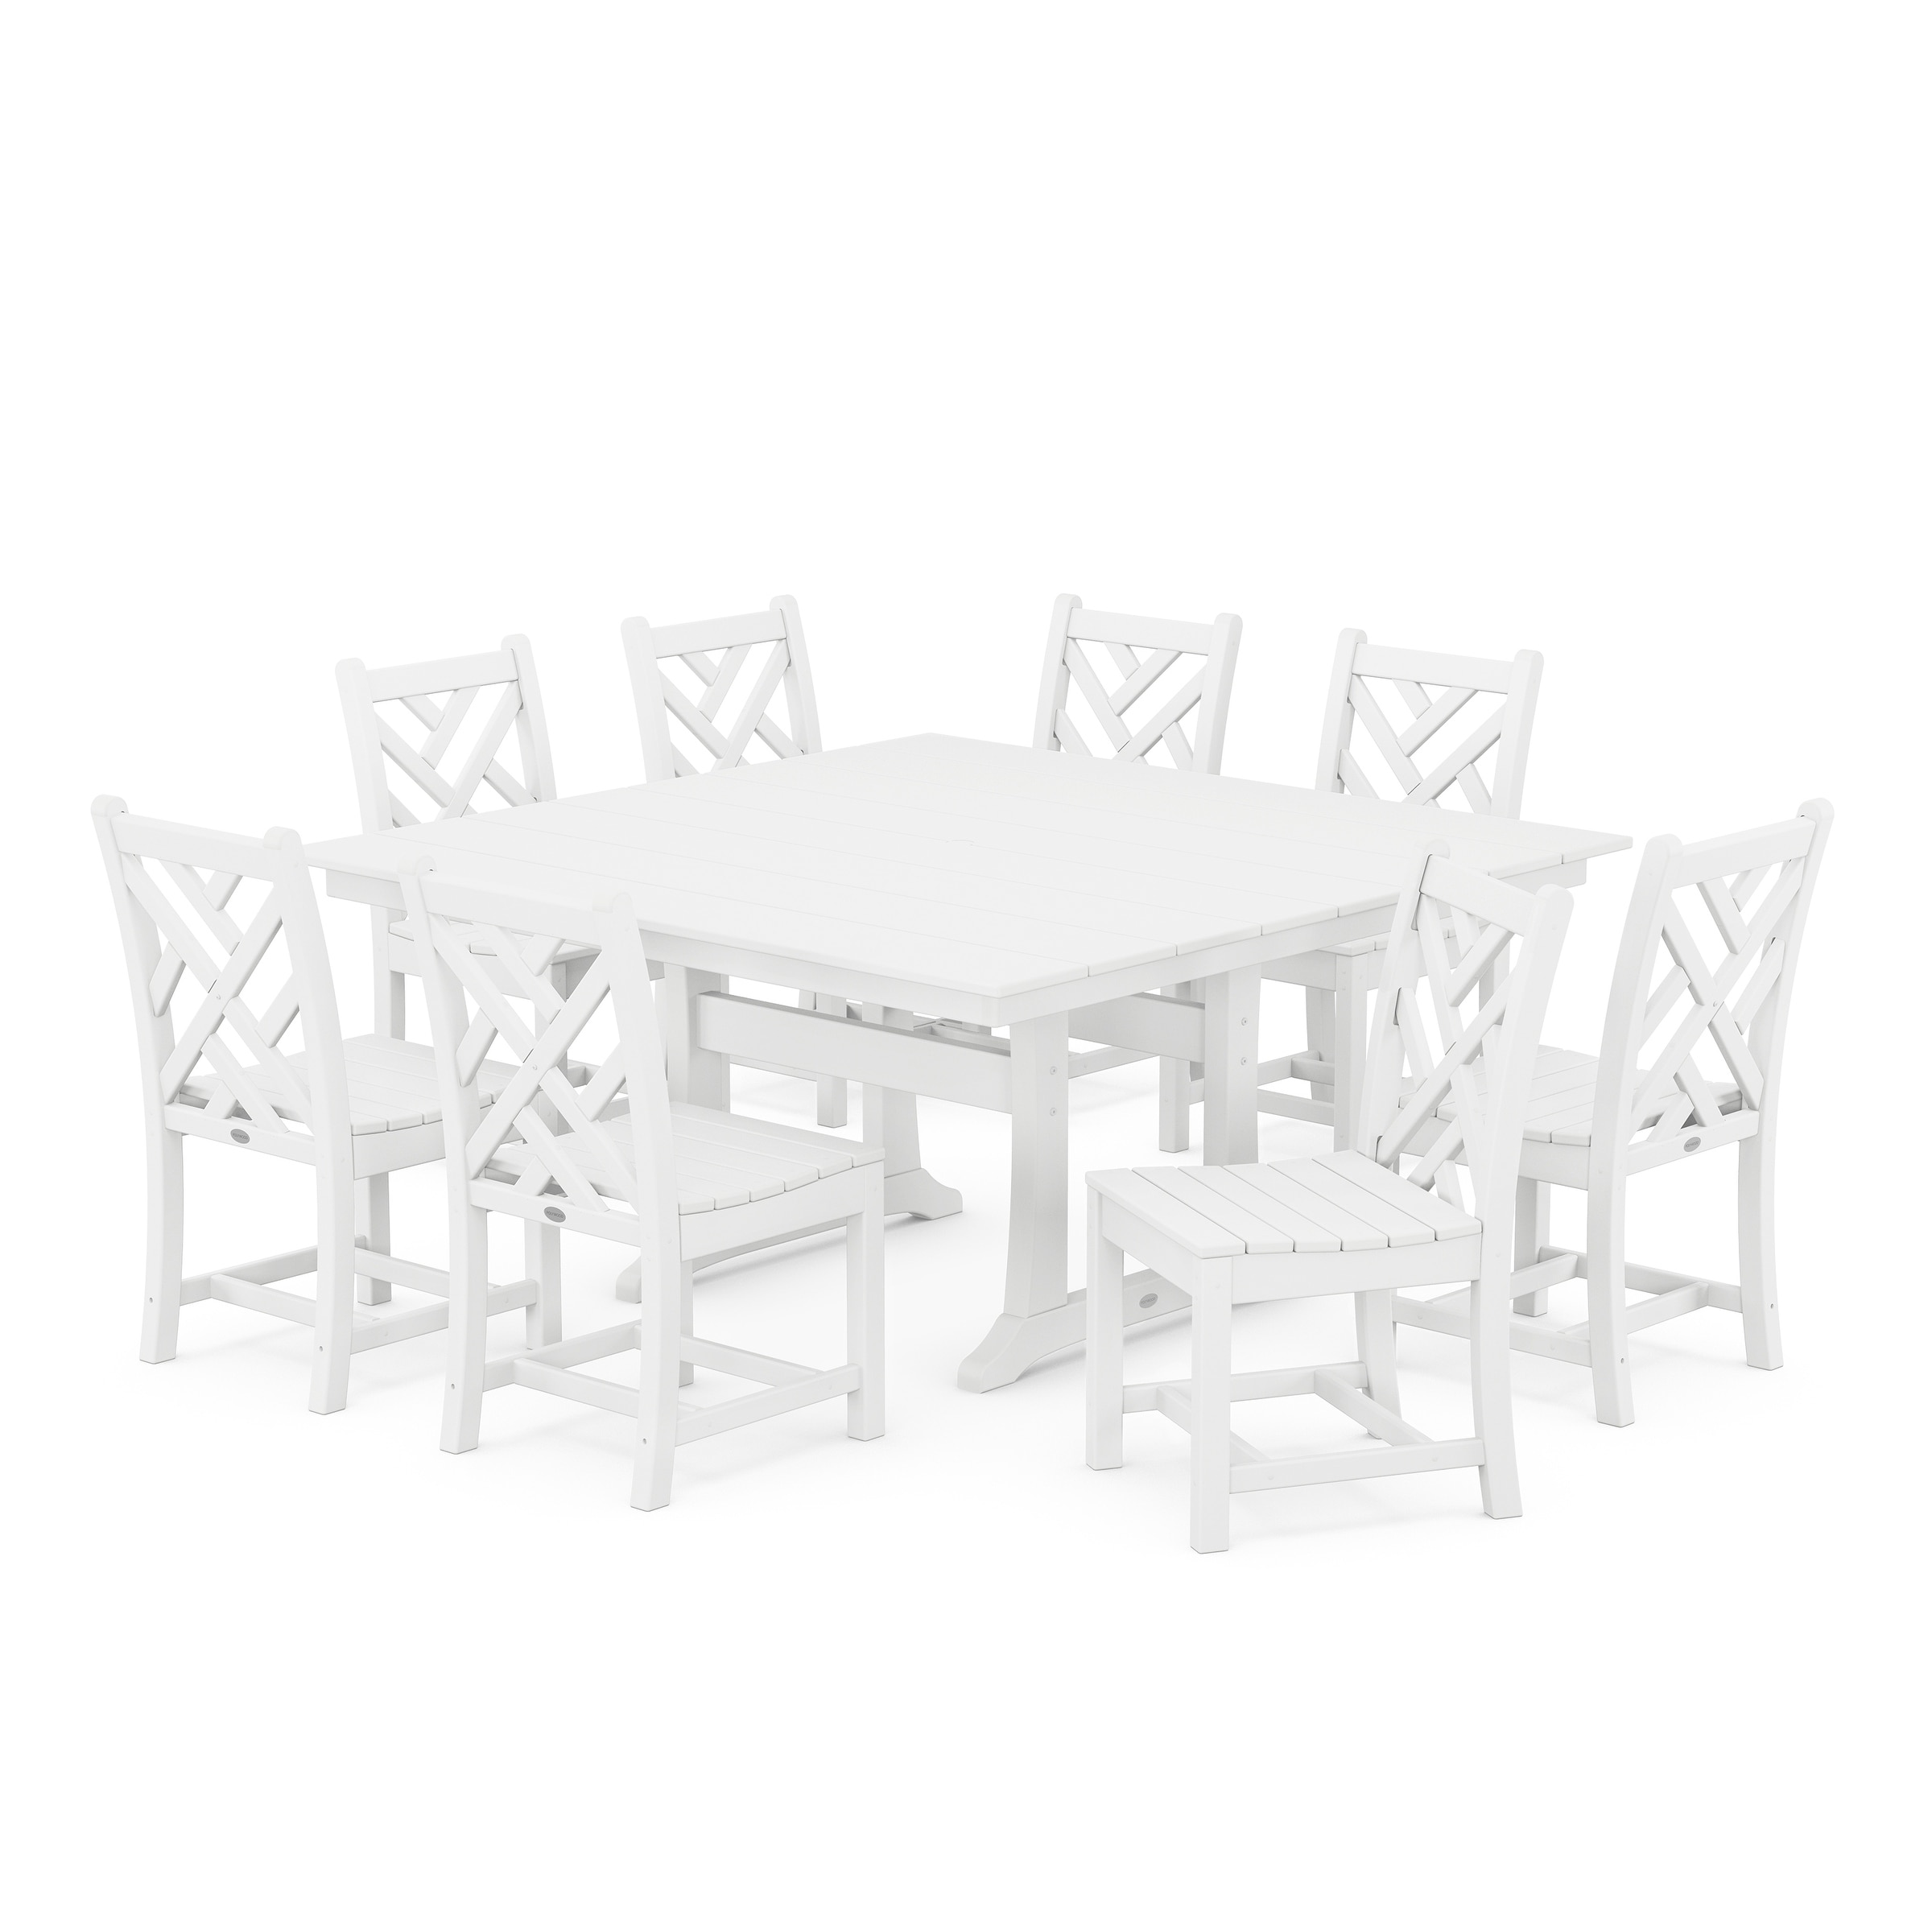 Polywood Chippendale 9-piece Farmhouse Trestle Dining Set